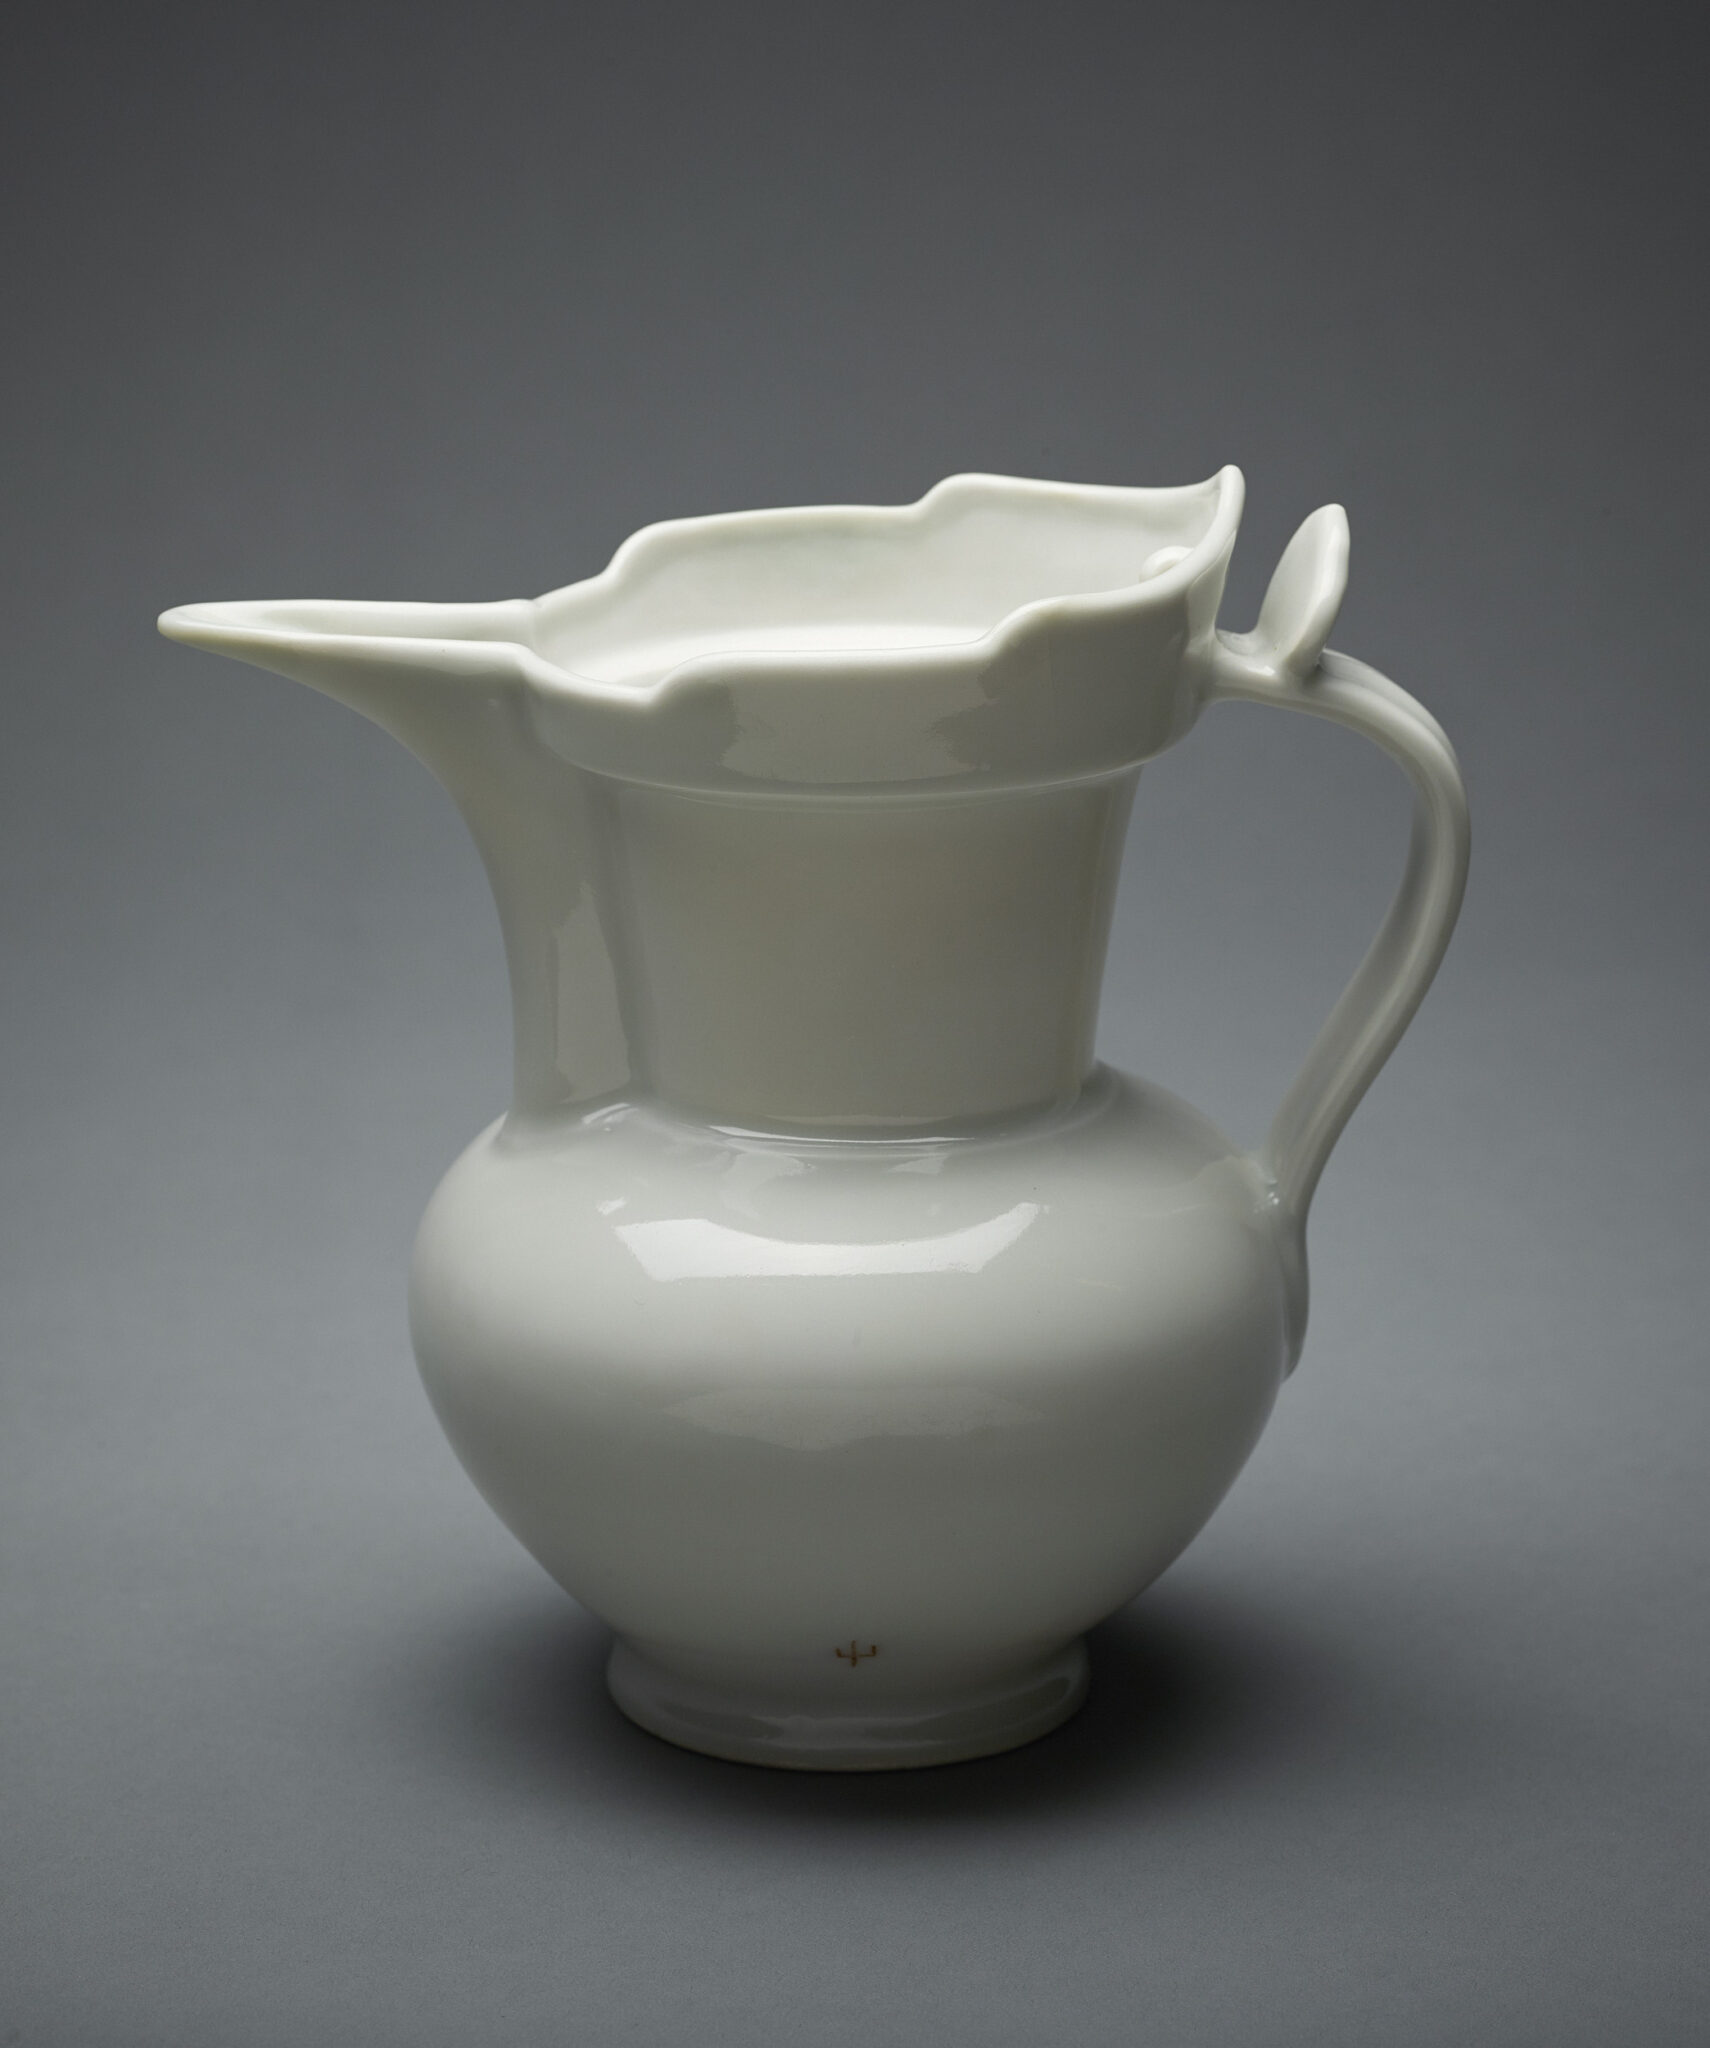 Glazed, milky-white porcelain pitcher with crown-shaped rim; handle features ovoid thumb rest